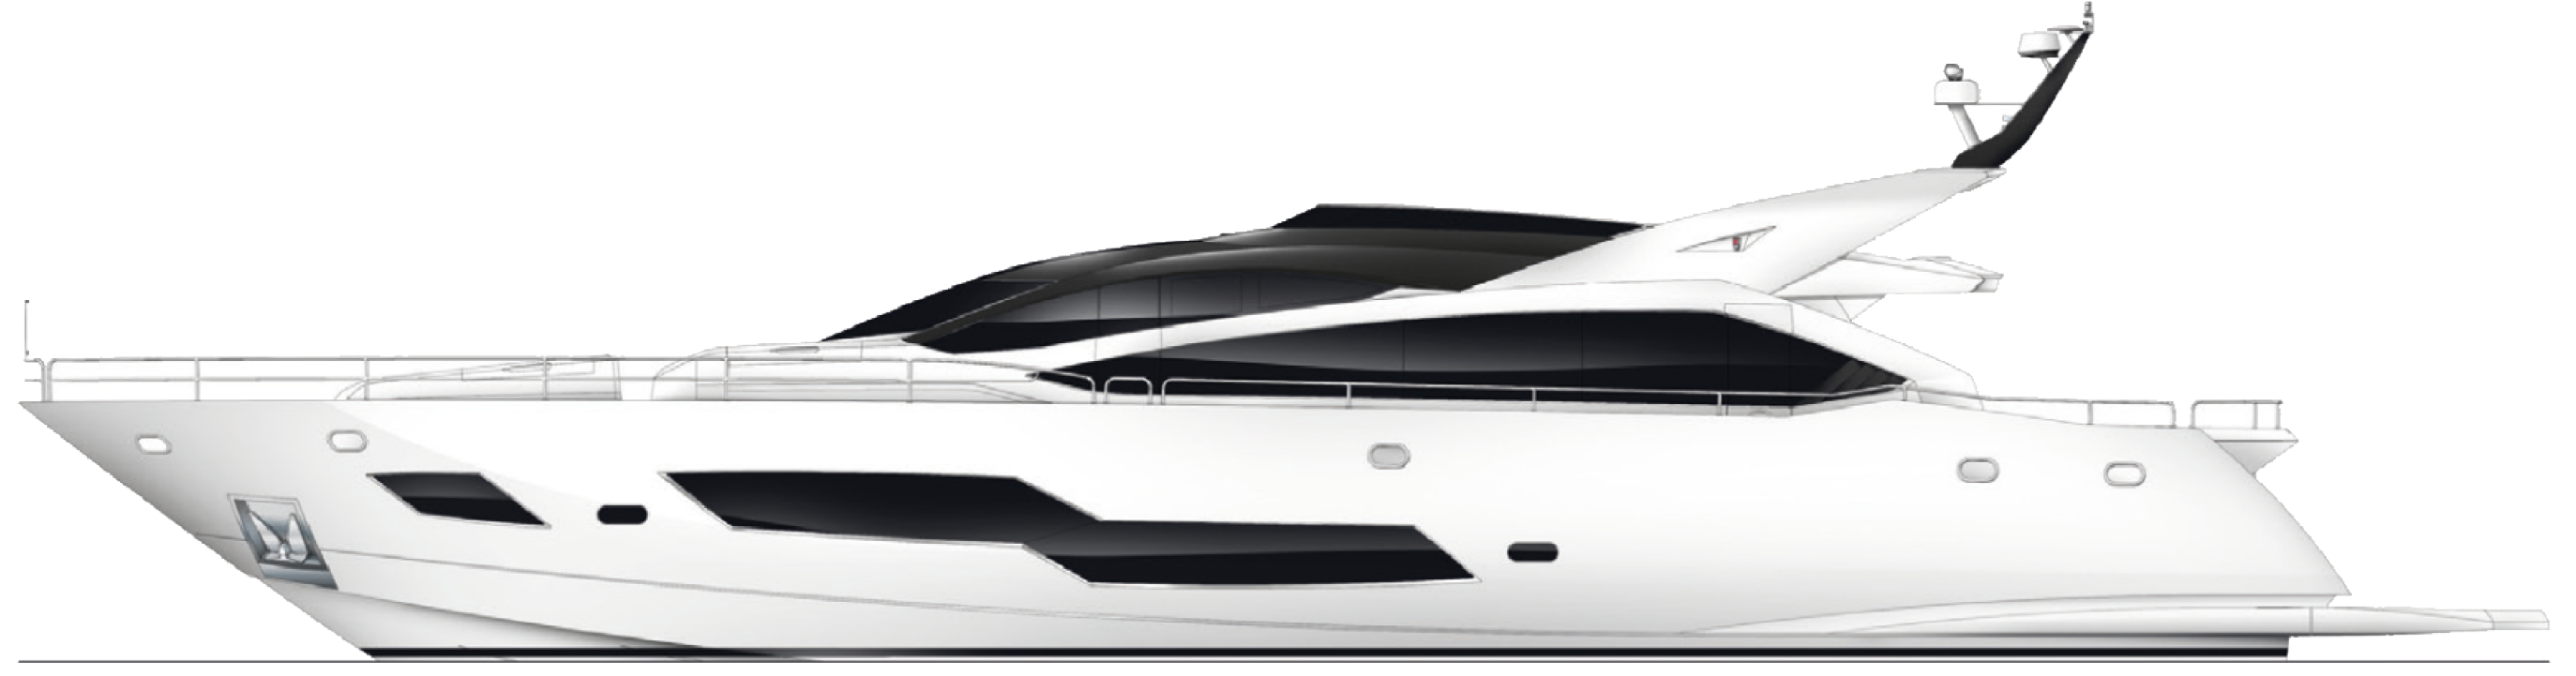 Luxury White Yacht Side View PNG